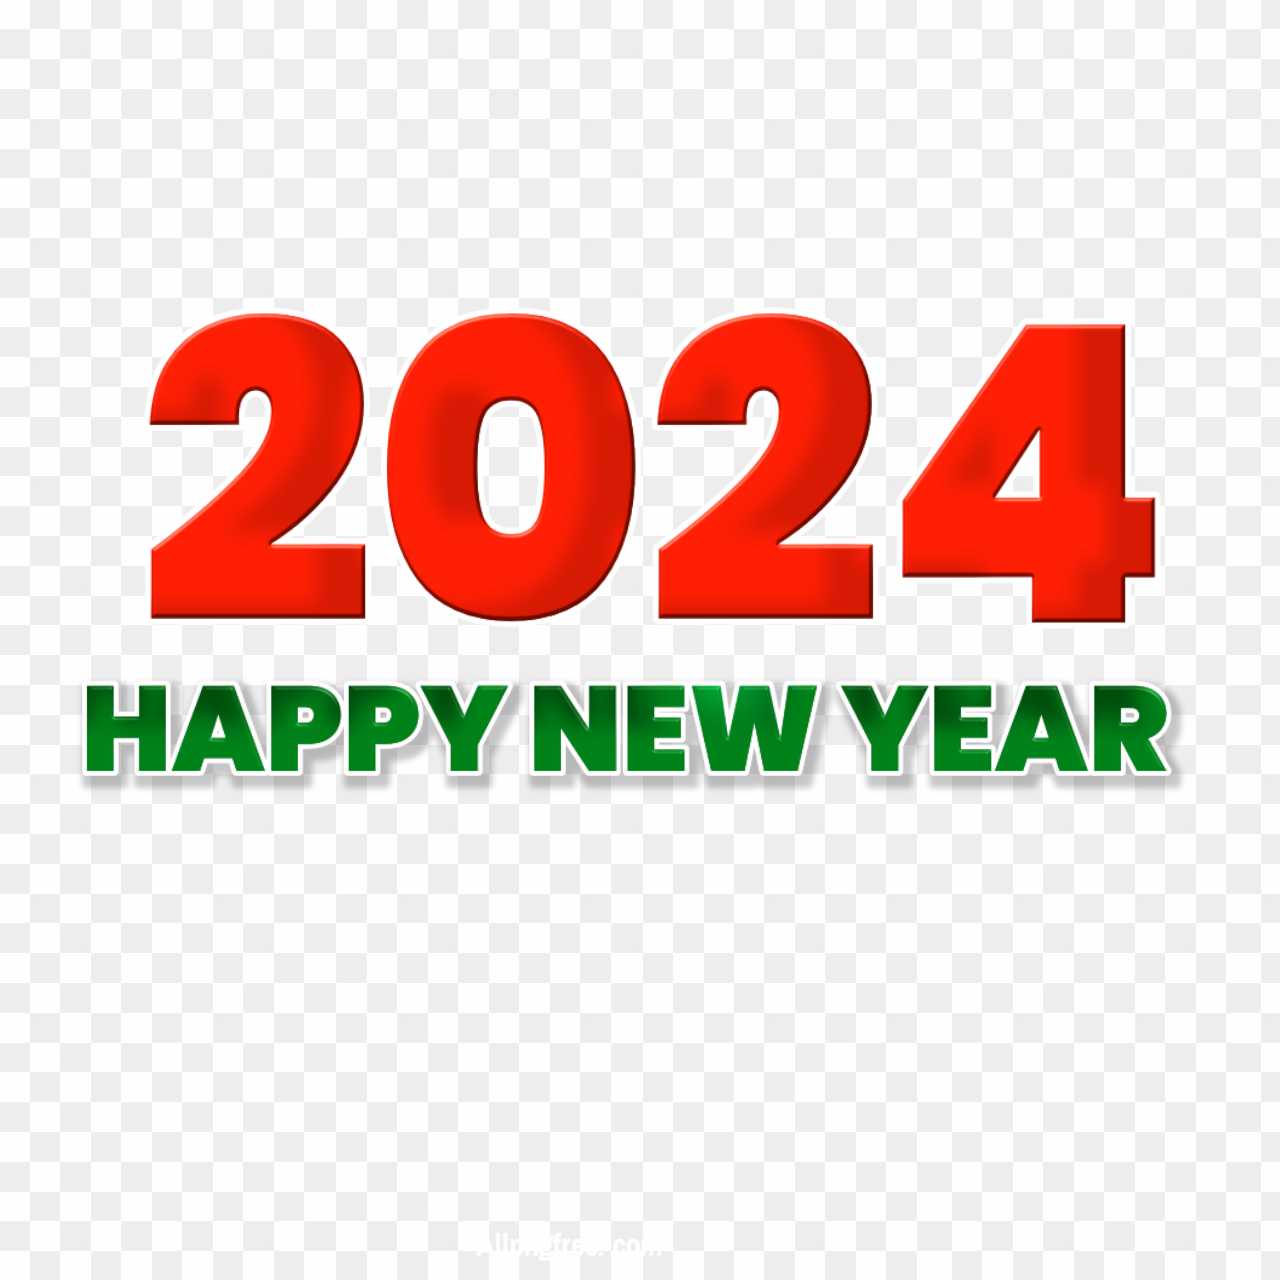 2024 Happy New Year PNG images download